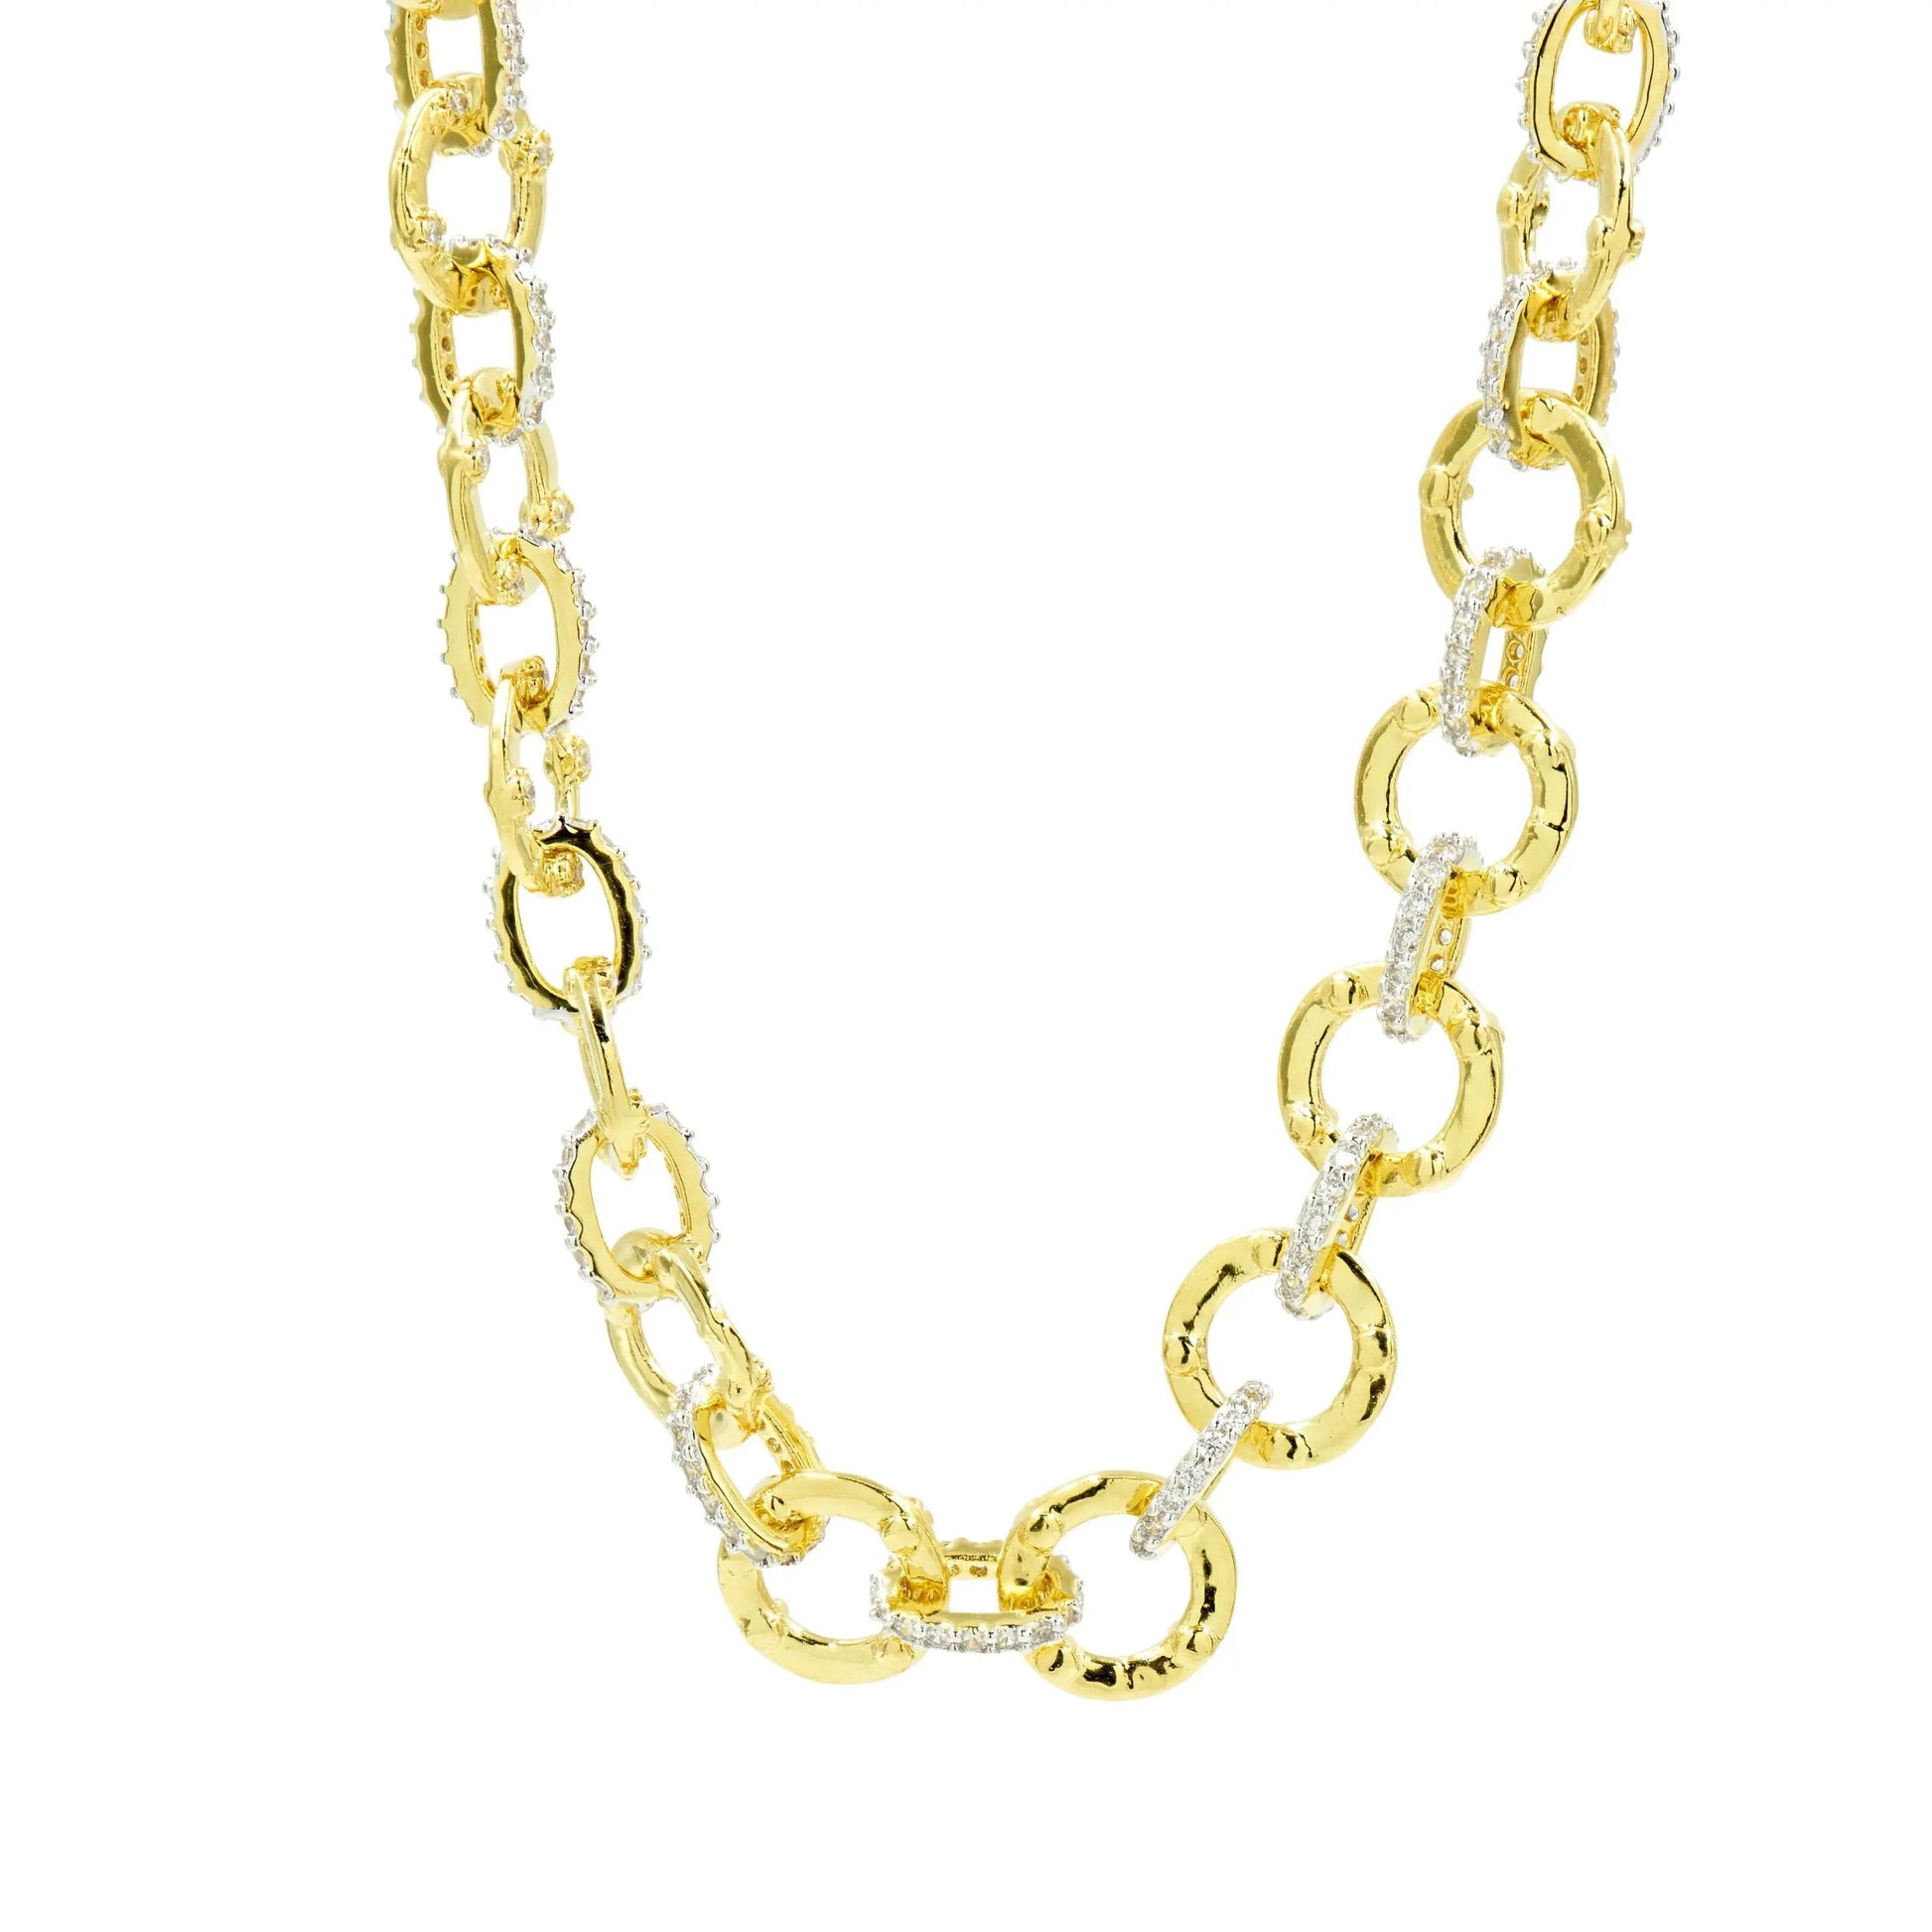  Chain Link Necklace Radiance NECKLACE